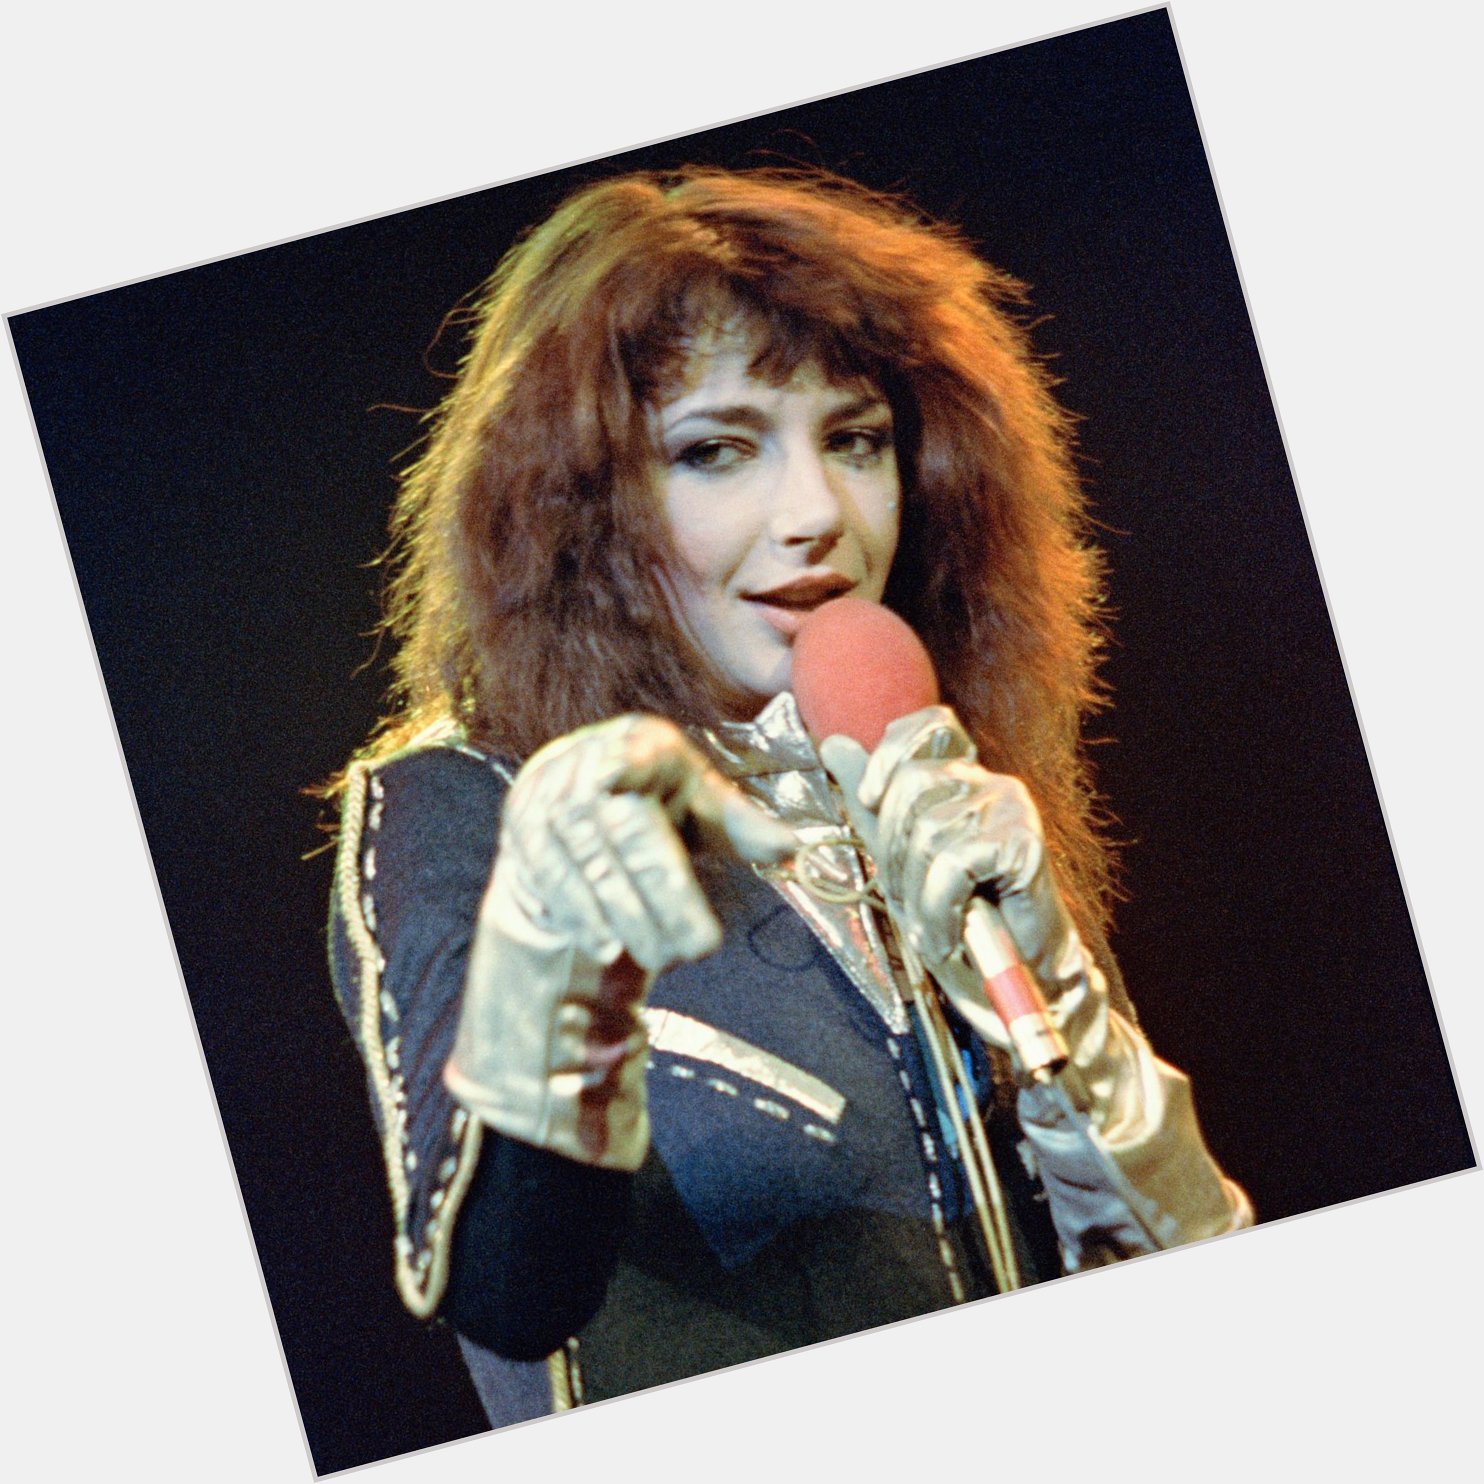 Happy birthday to Kate Bush! Soooo talented and rad. Dive into her music if you are not aware of her awesomeness. 